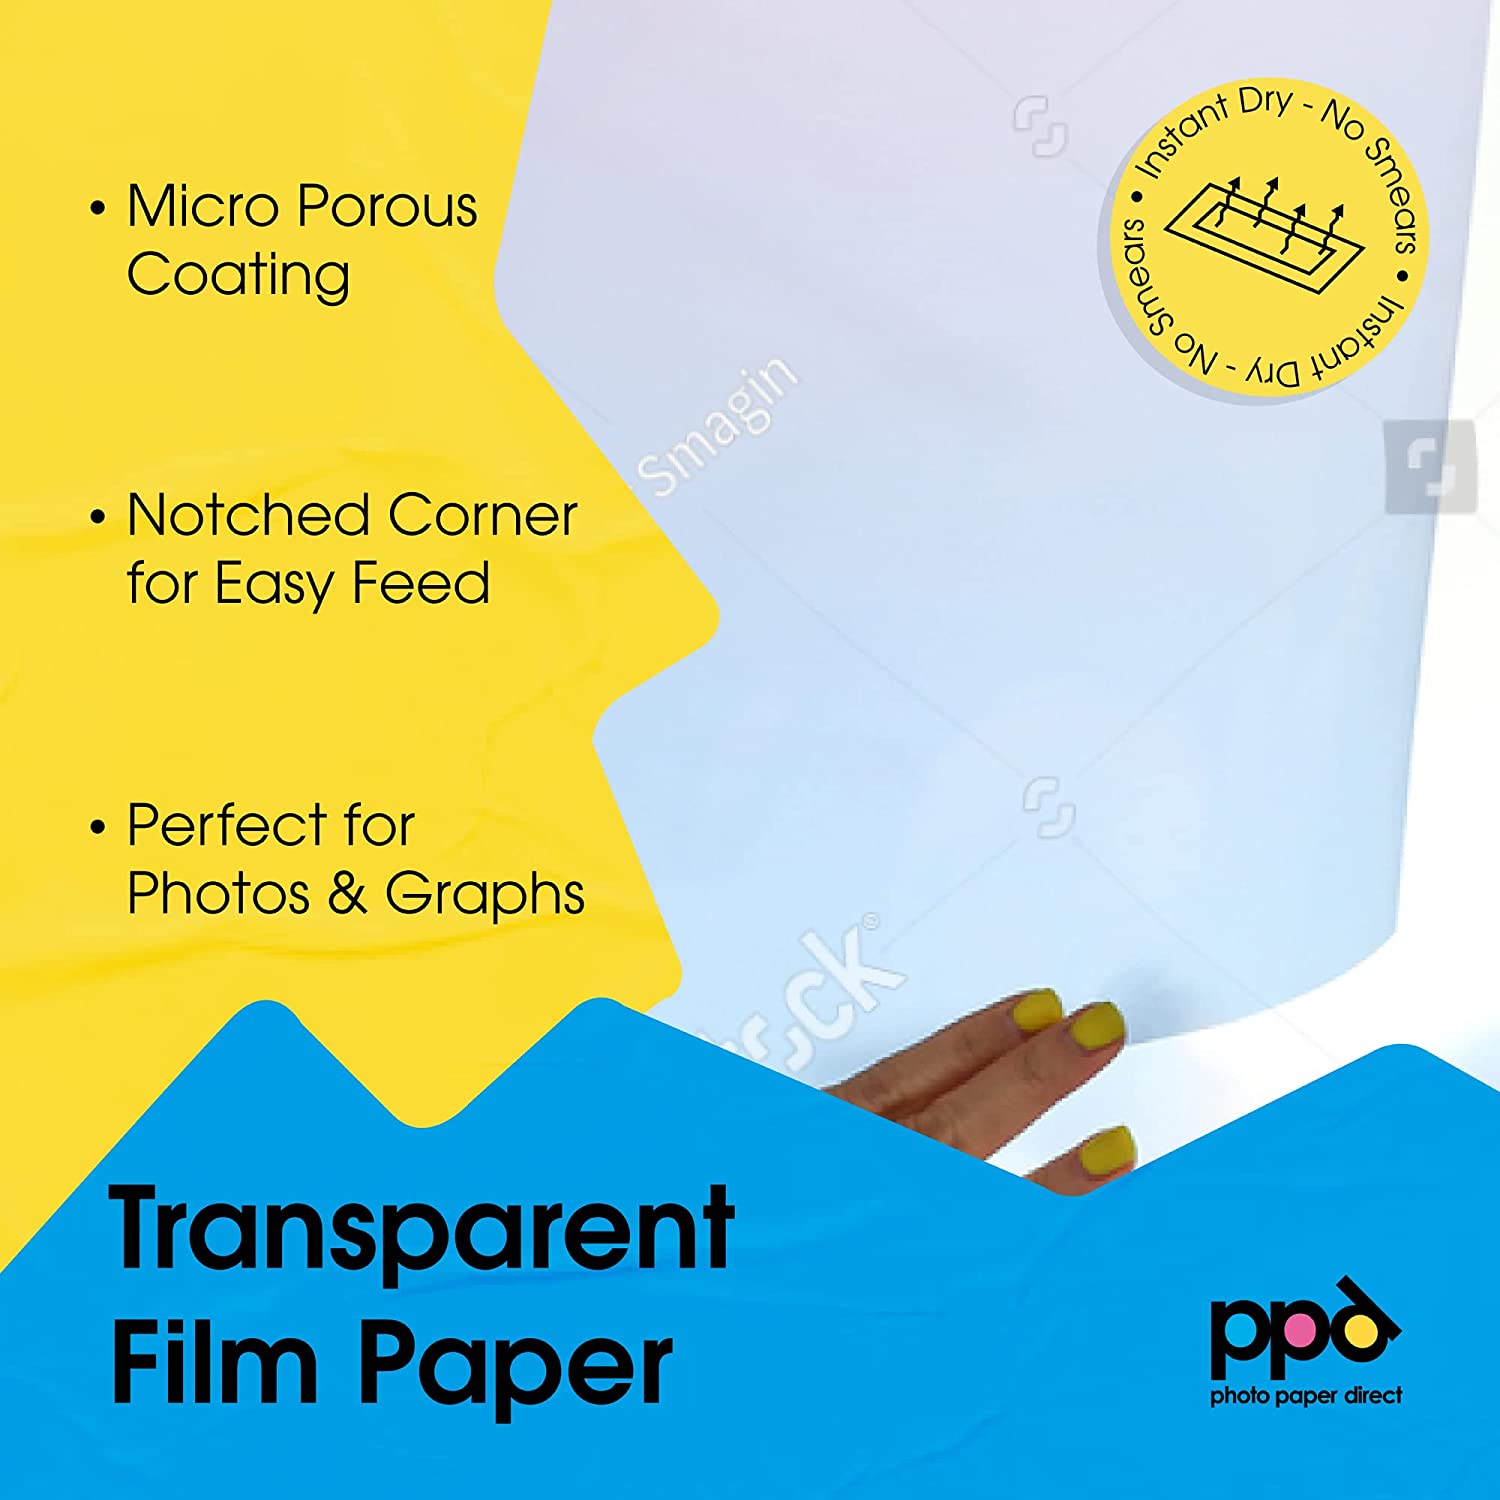 PPD Inkjet Transparencies Overhead Projector Film (OHP Film) 8.5 x 11" 5 Mil PPD-34